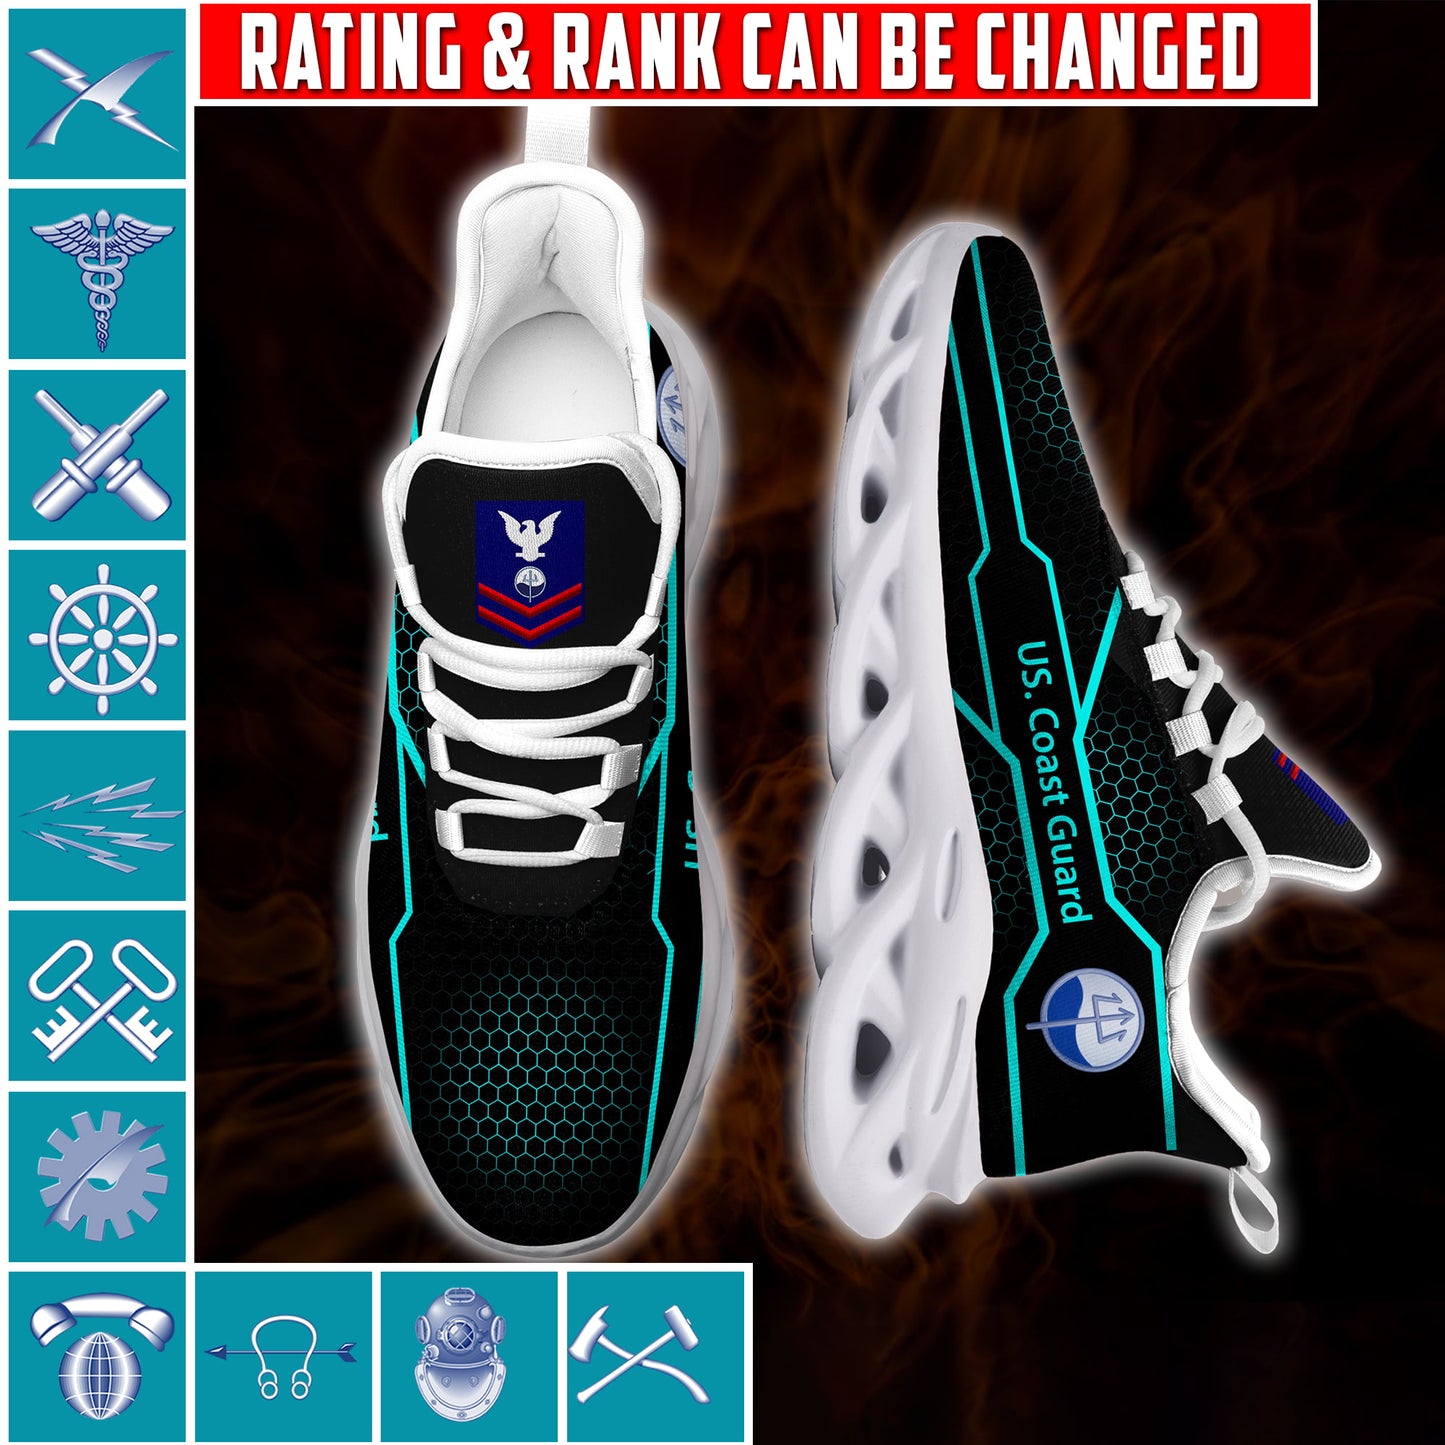 US Military – Coast Guard Rating All Over Print Sneakers